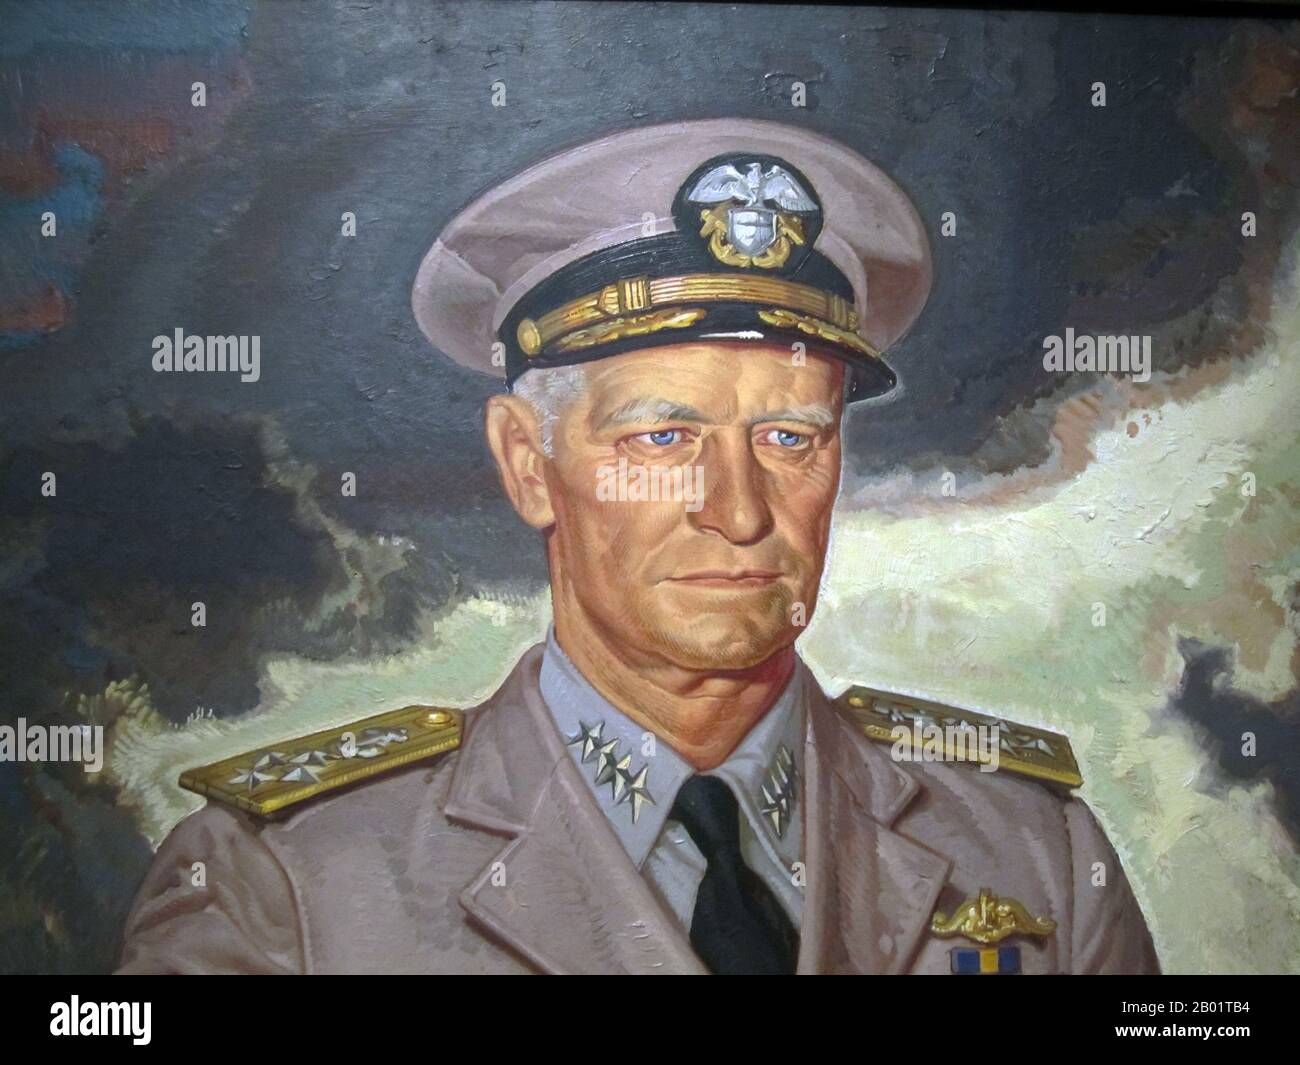 USA: Admiral Chester William Nimitz (24 February 1885 - 20 February 1966). Oil on board painting by Dean Cornwell (5 March 1892 - 4 December 1960), 1944.  Fleet Admiral Chester William Nimitz, GCB, USN was a five-star admiral of the United States Navy. He held the dual command of Commander in Chief, United States Pacific Fleet (CinCPac), for U.S. naval forces and Commander in Chief, Pacific Ocean Areas (CinCPOA), for U.S. and Allied air, land and sea forces during World War II.  He was the leading U.S. Navy authority on submarines, as well as Chief of the Navy's Bureau of Navigation in 1939. Stock Photo